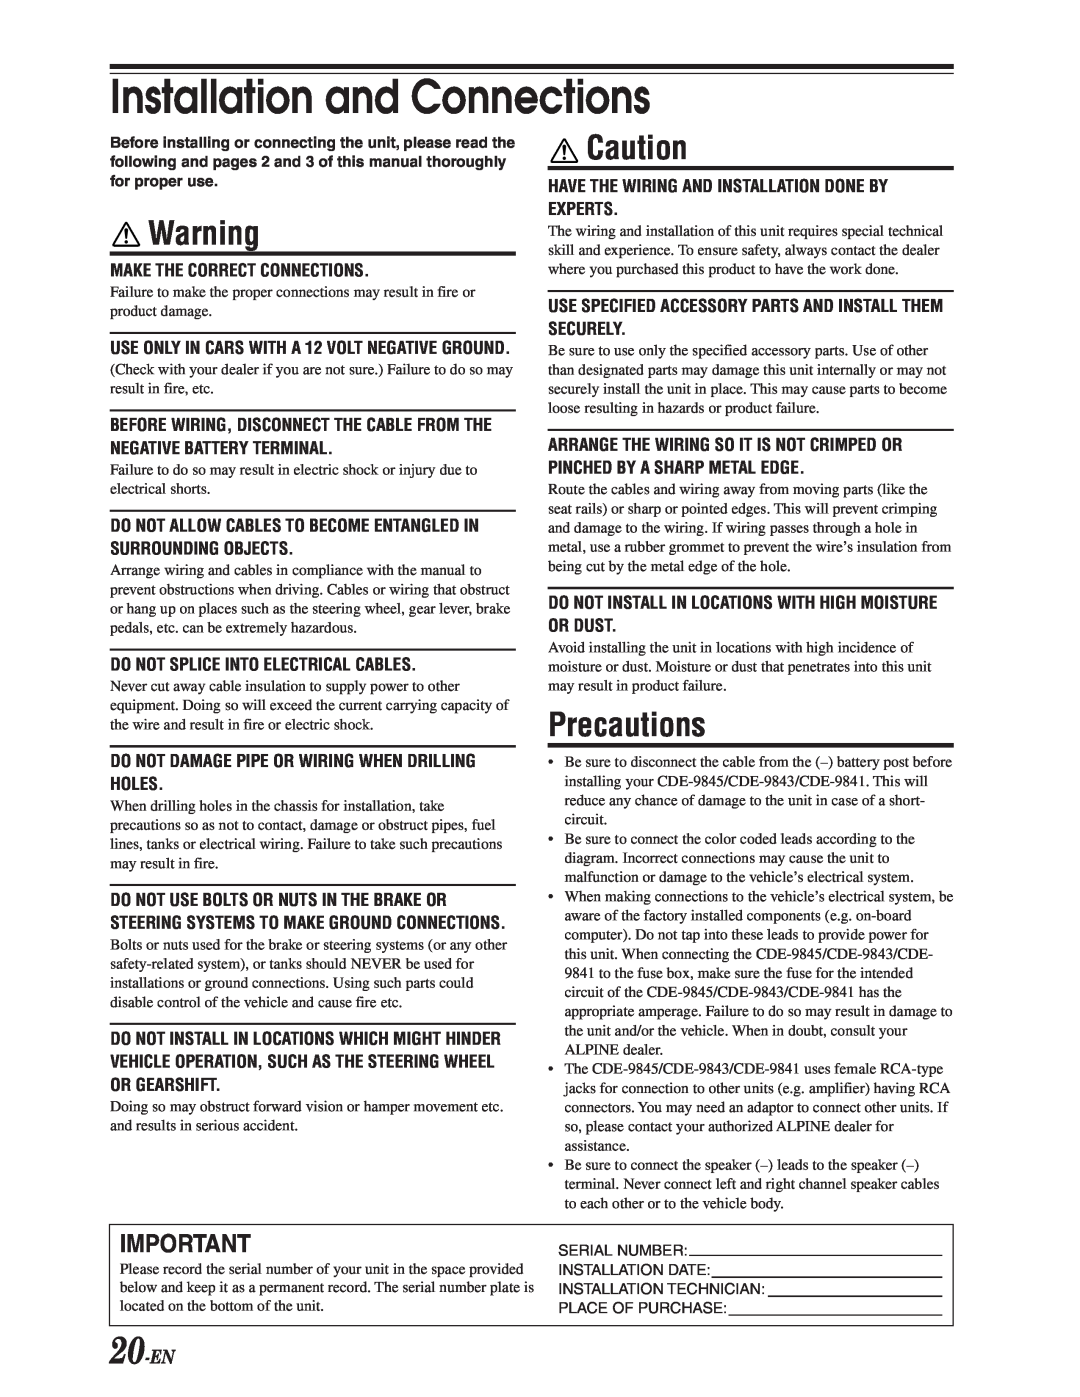 Alpine CDE-9843, CDE-9841, CDE-9845 owner manual Precautions, 20-EN, Installation and Connections 